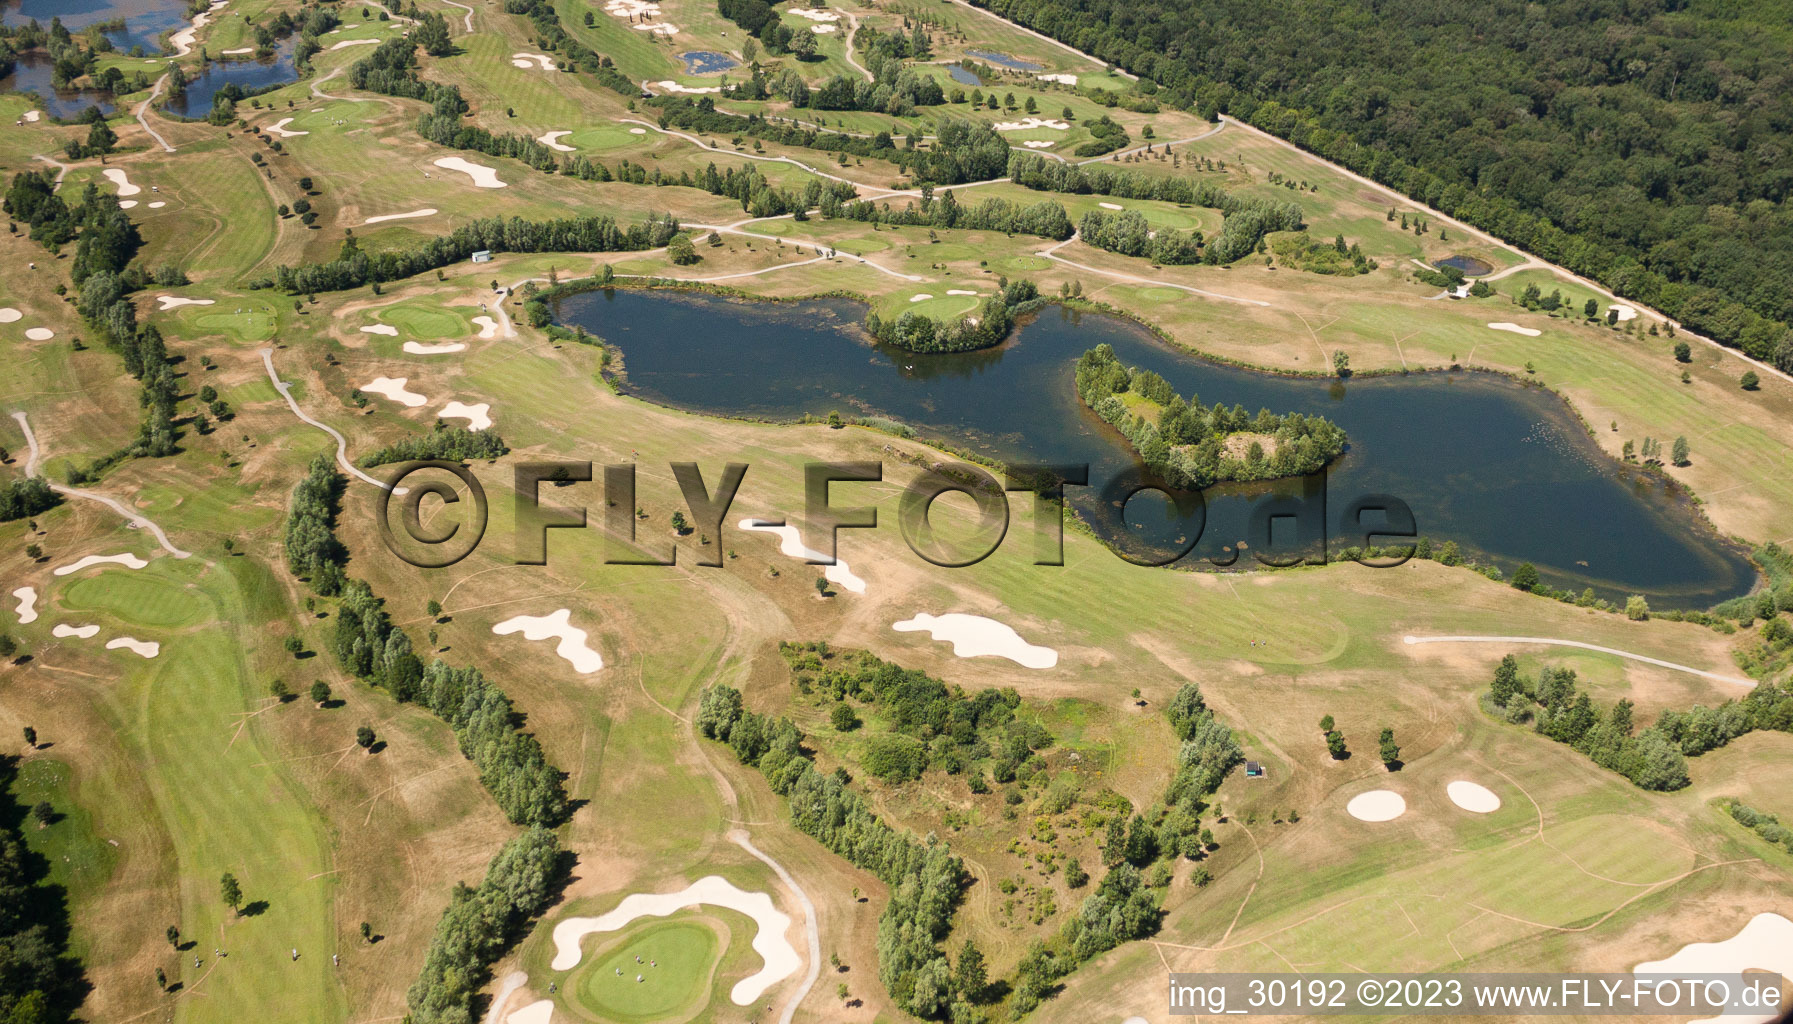 Dreihof Golf Club in Essingen in the state Rhineland-Palatinate, Germany from a drone